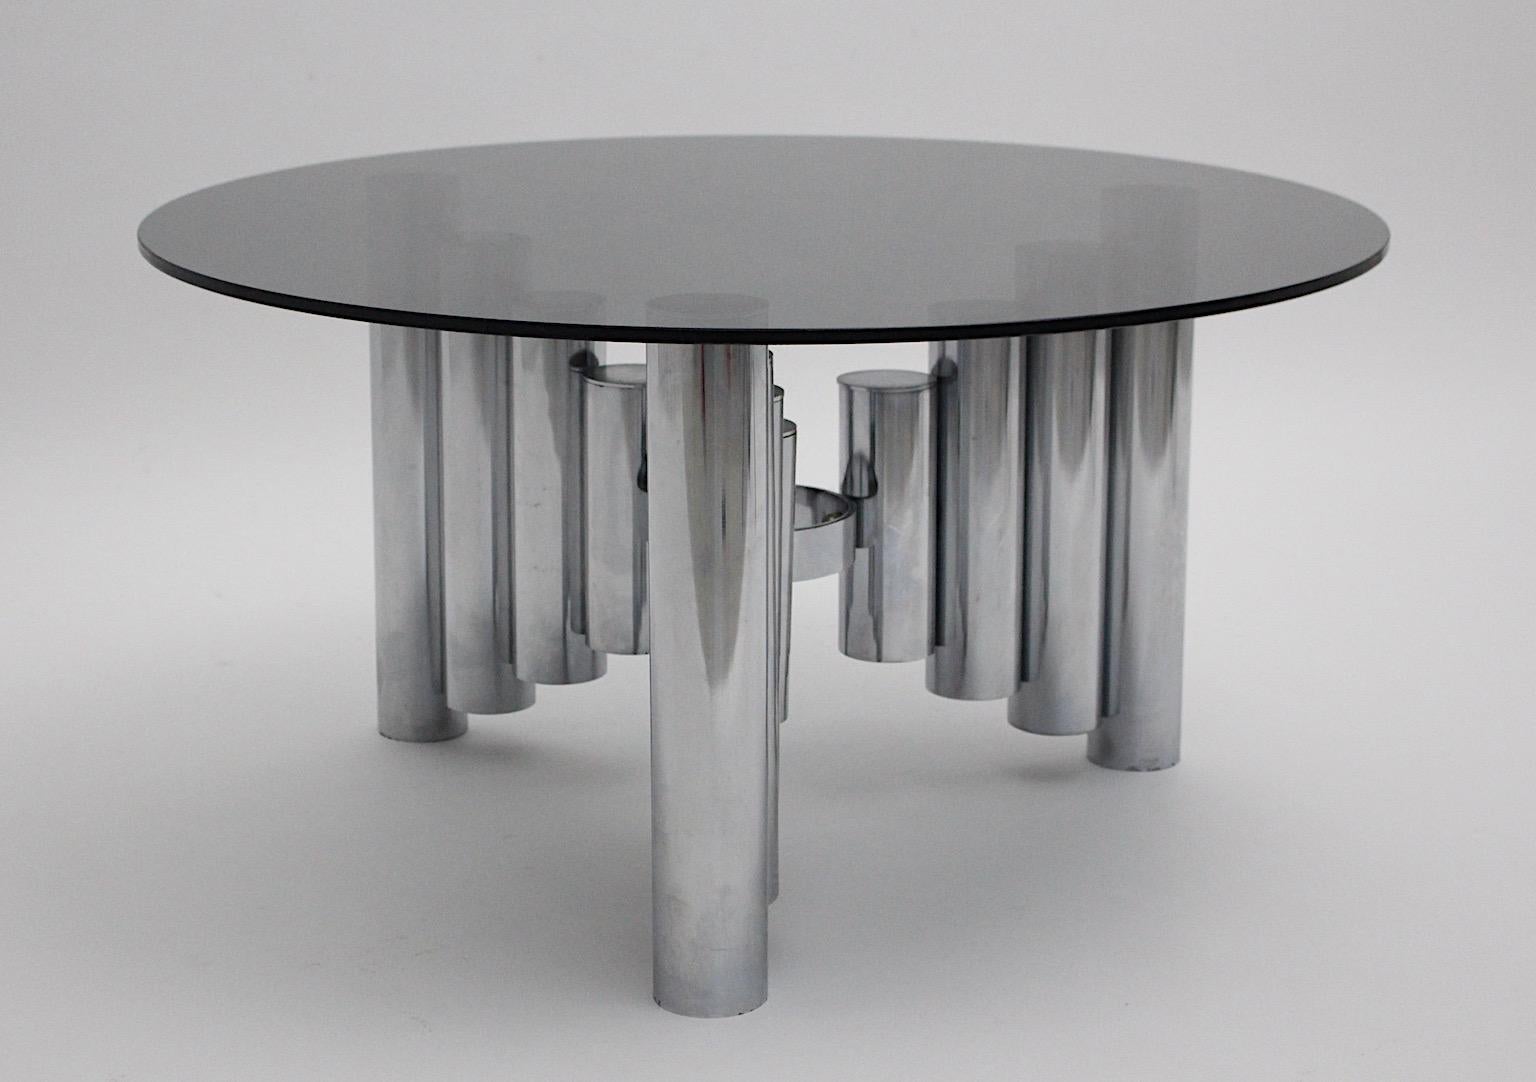 Space Age Chromed Glass Vintage Coffee Table, Manhattan, 1960s For Sale 2